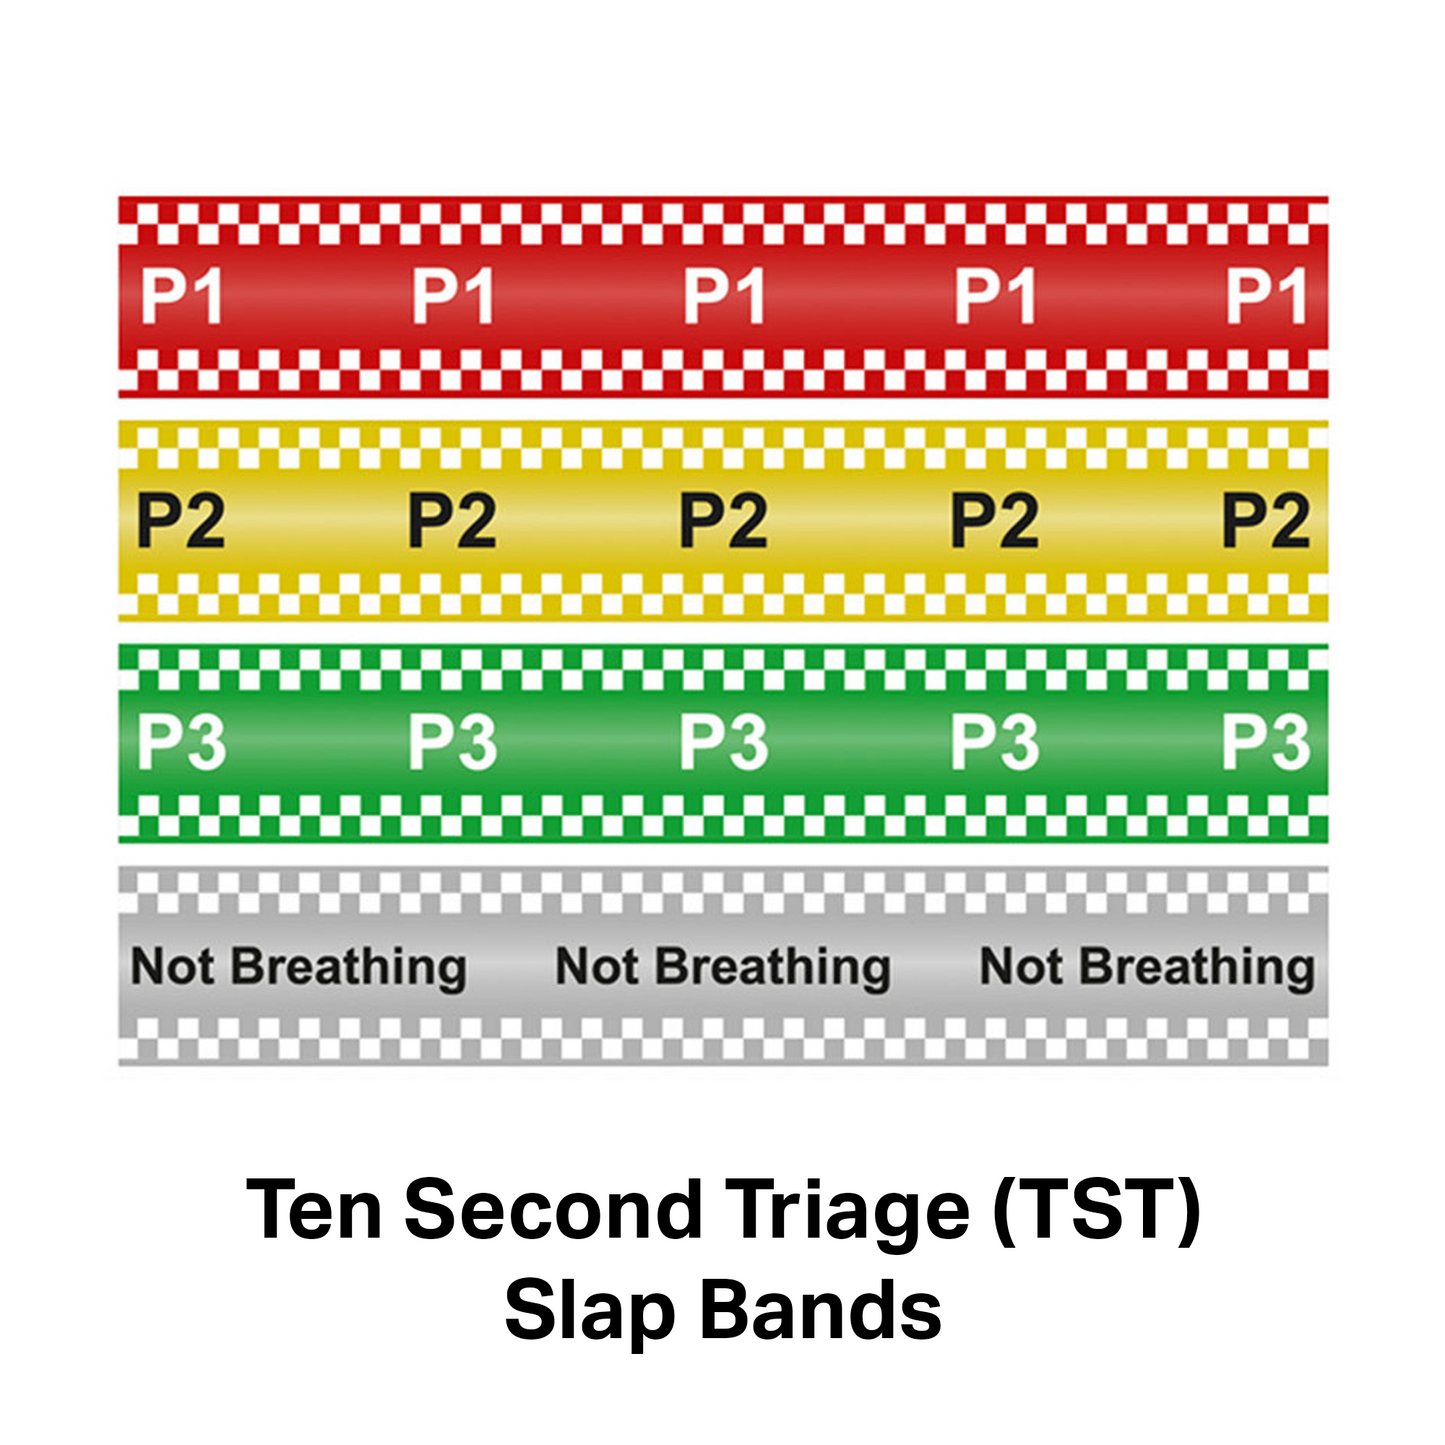 NHS Ten Second Triage (TST) Slap Band Pack of 20 - Red Case